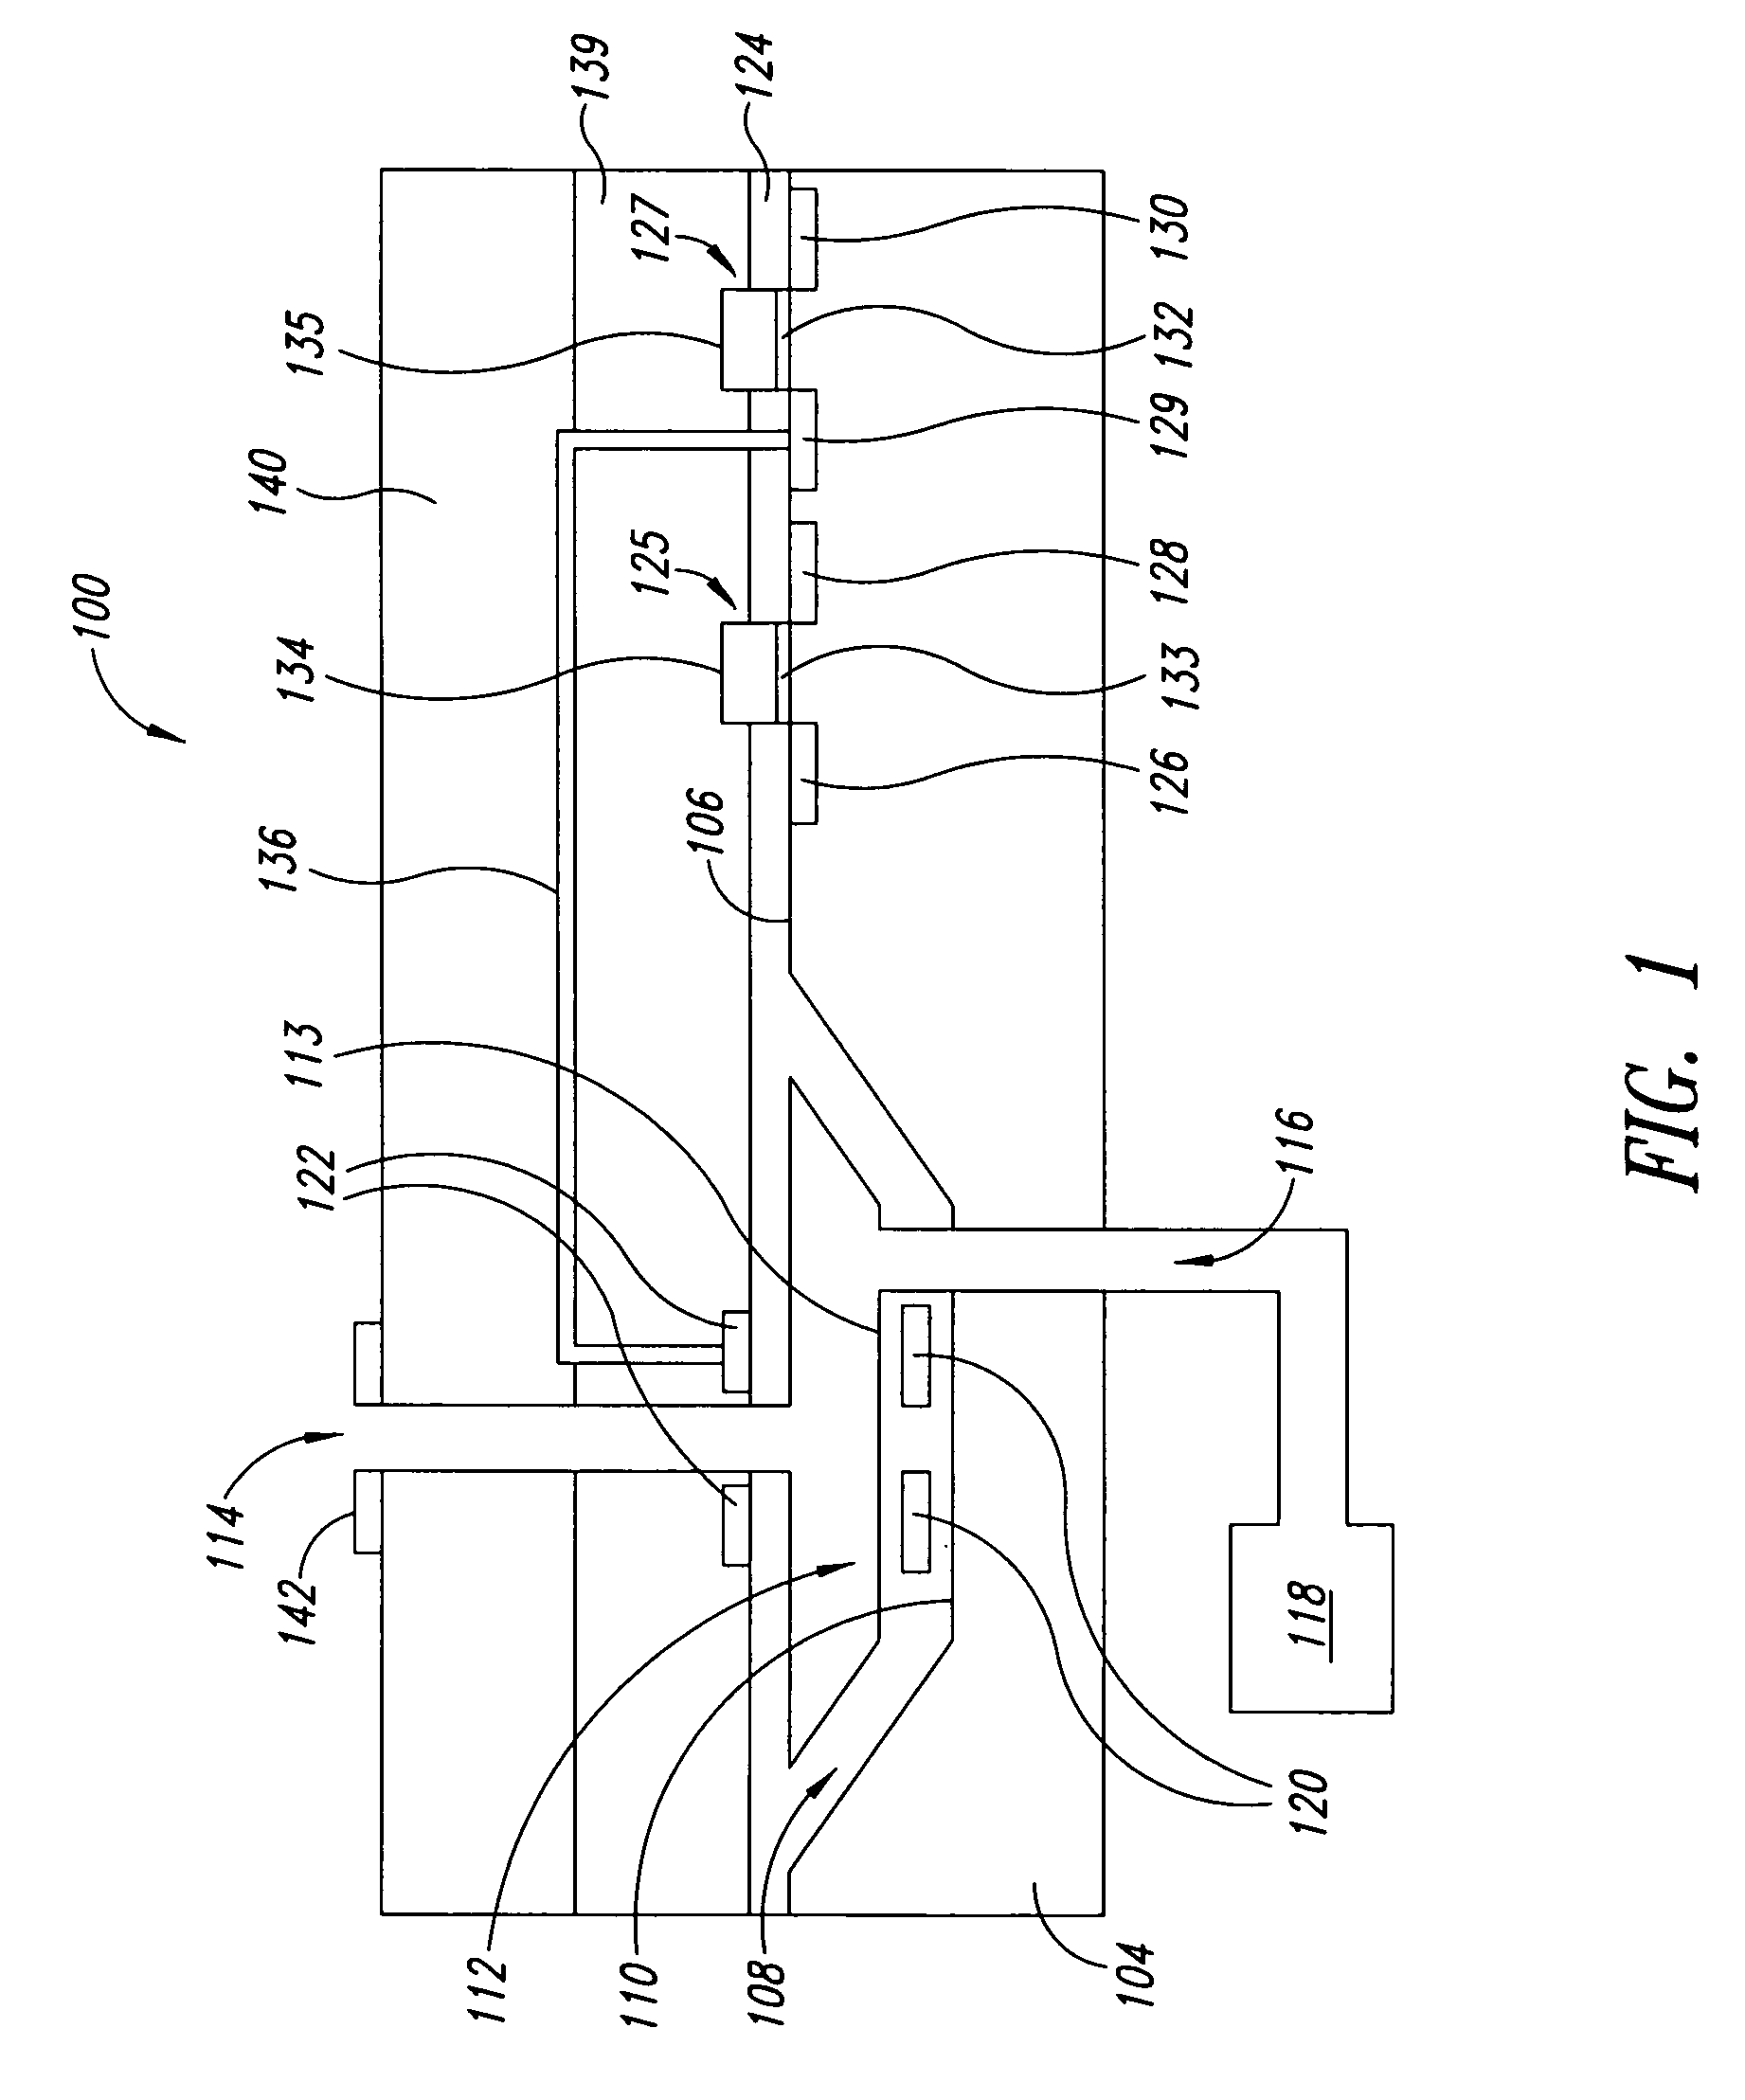 Heating system and method for microfluidic and micromechanical applications